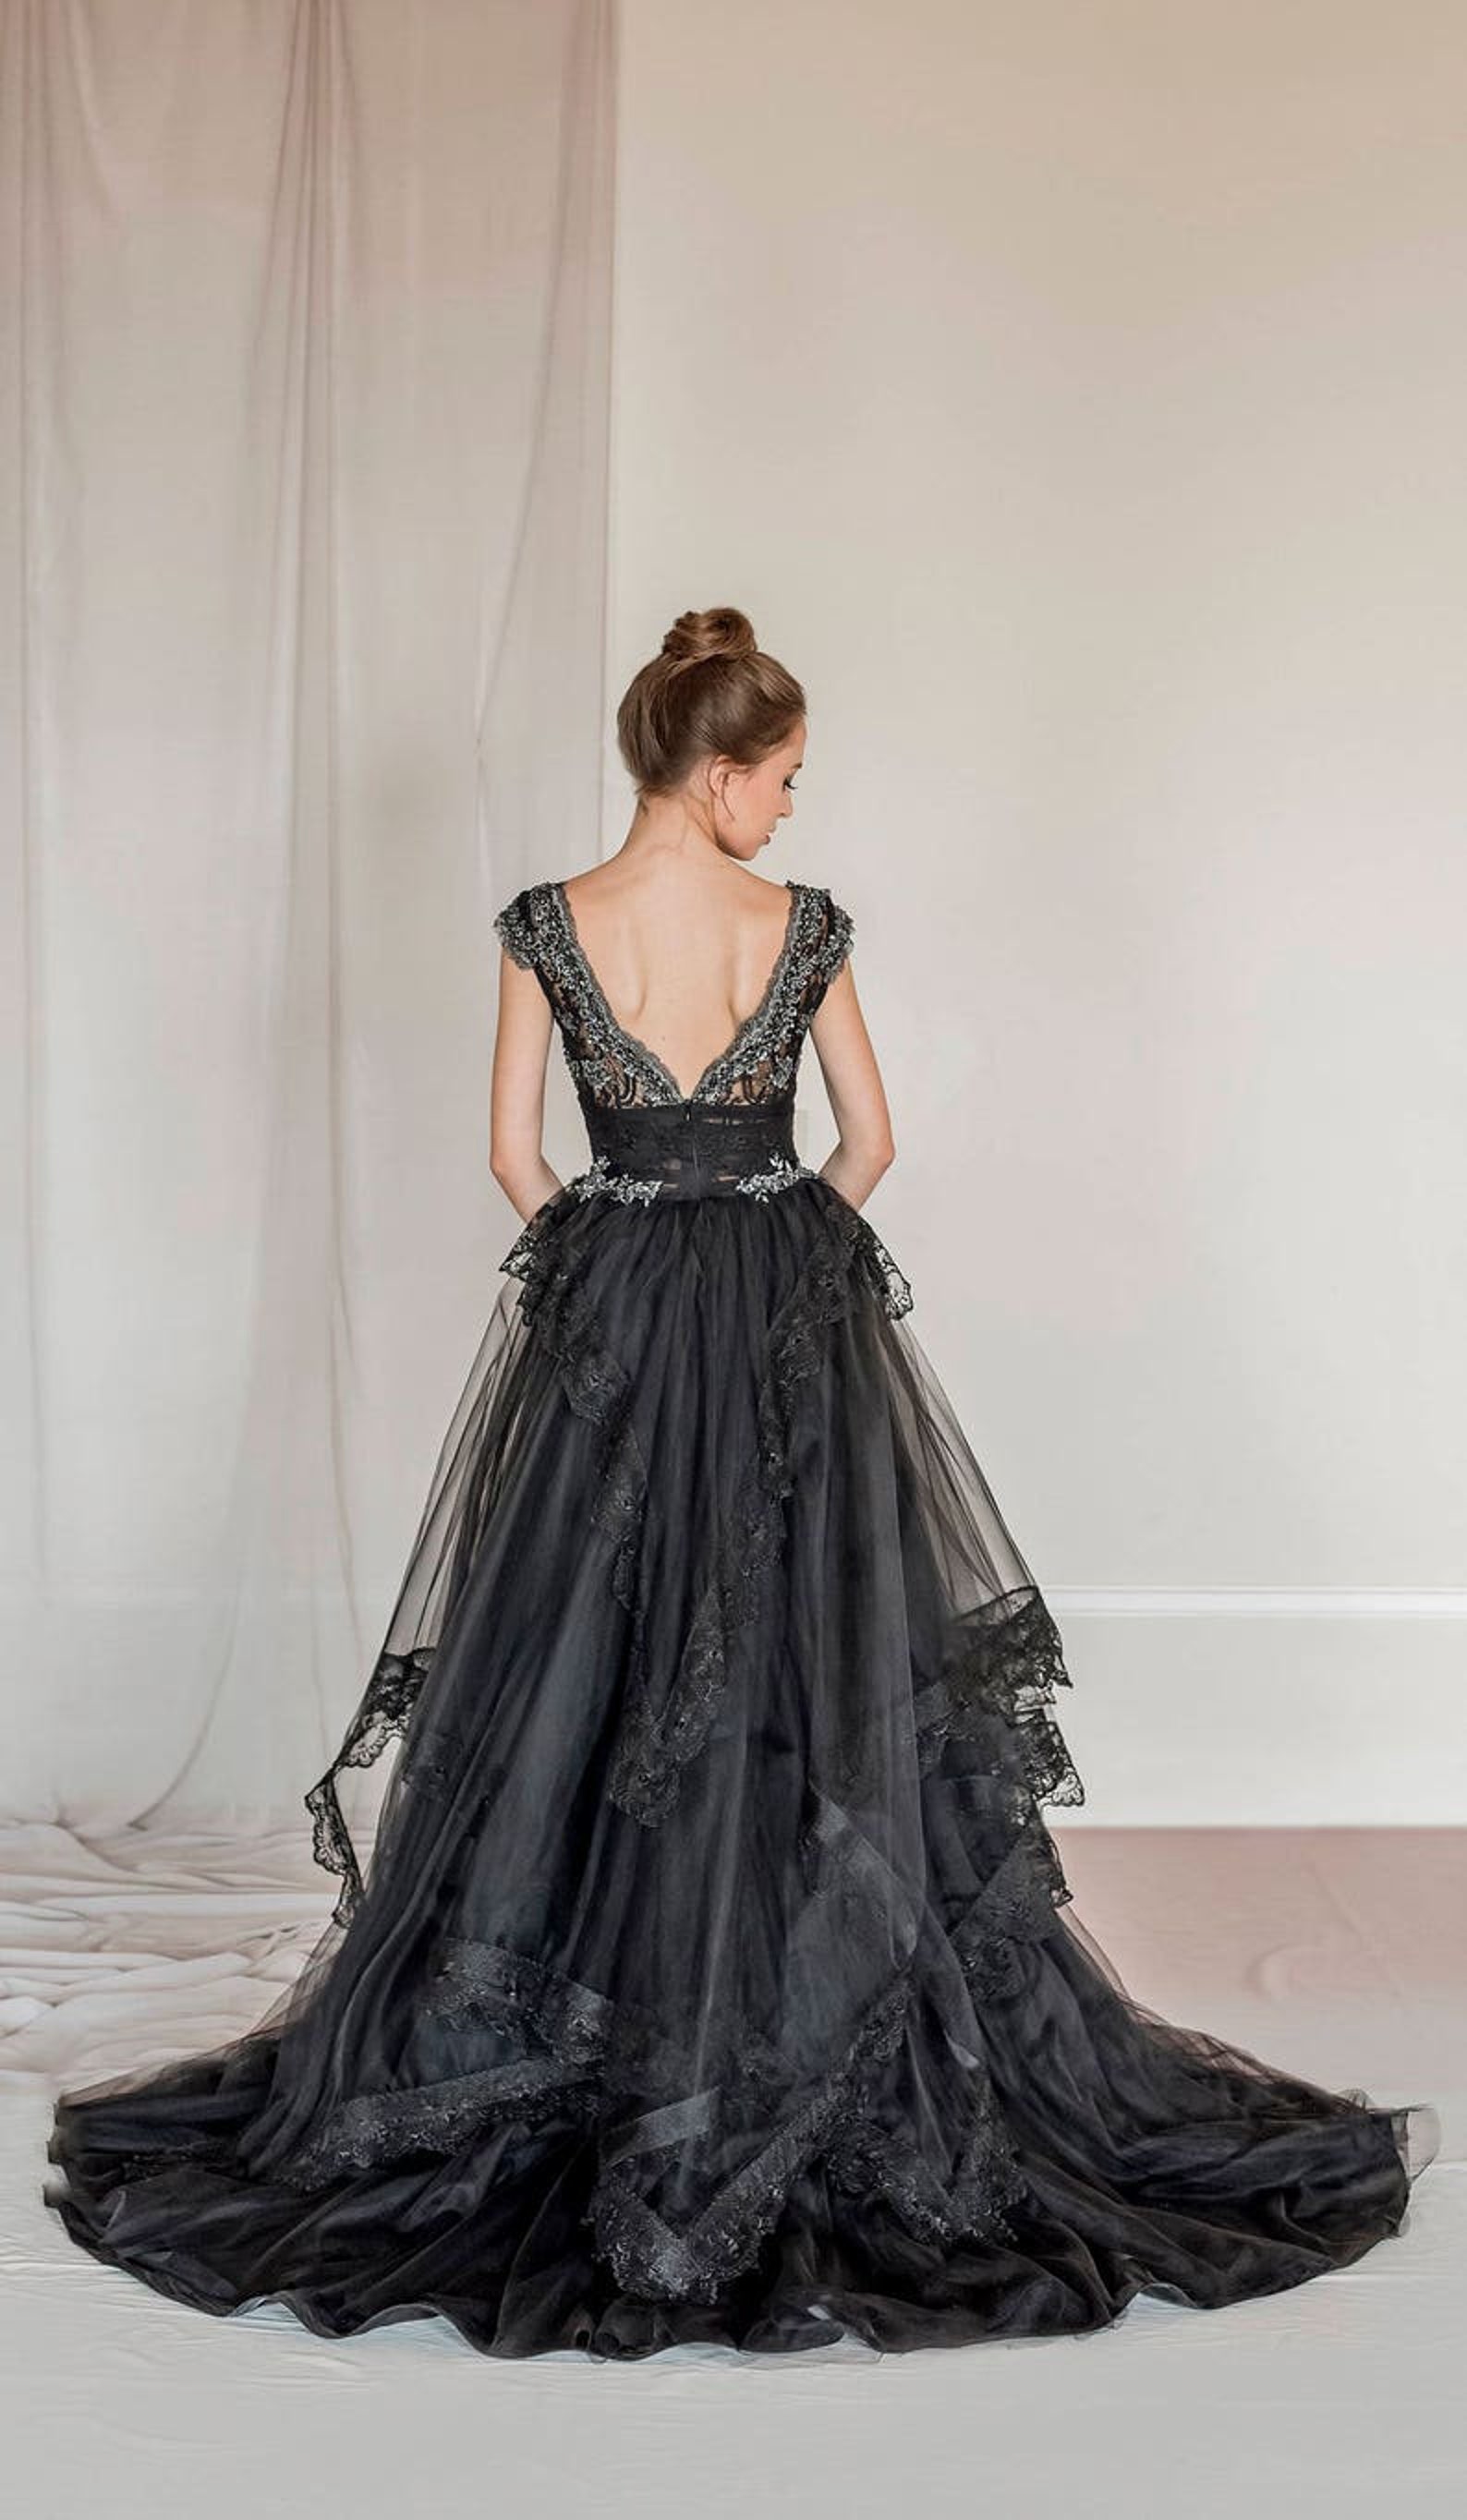 Black Tulle and Lace Evening Gown, Black Wedding Dress, Black Wedding ...